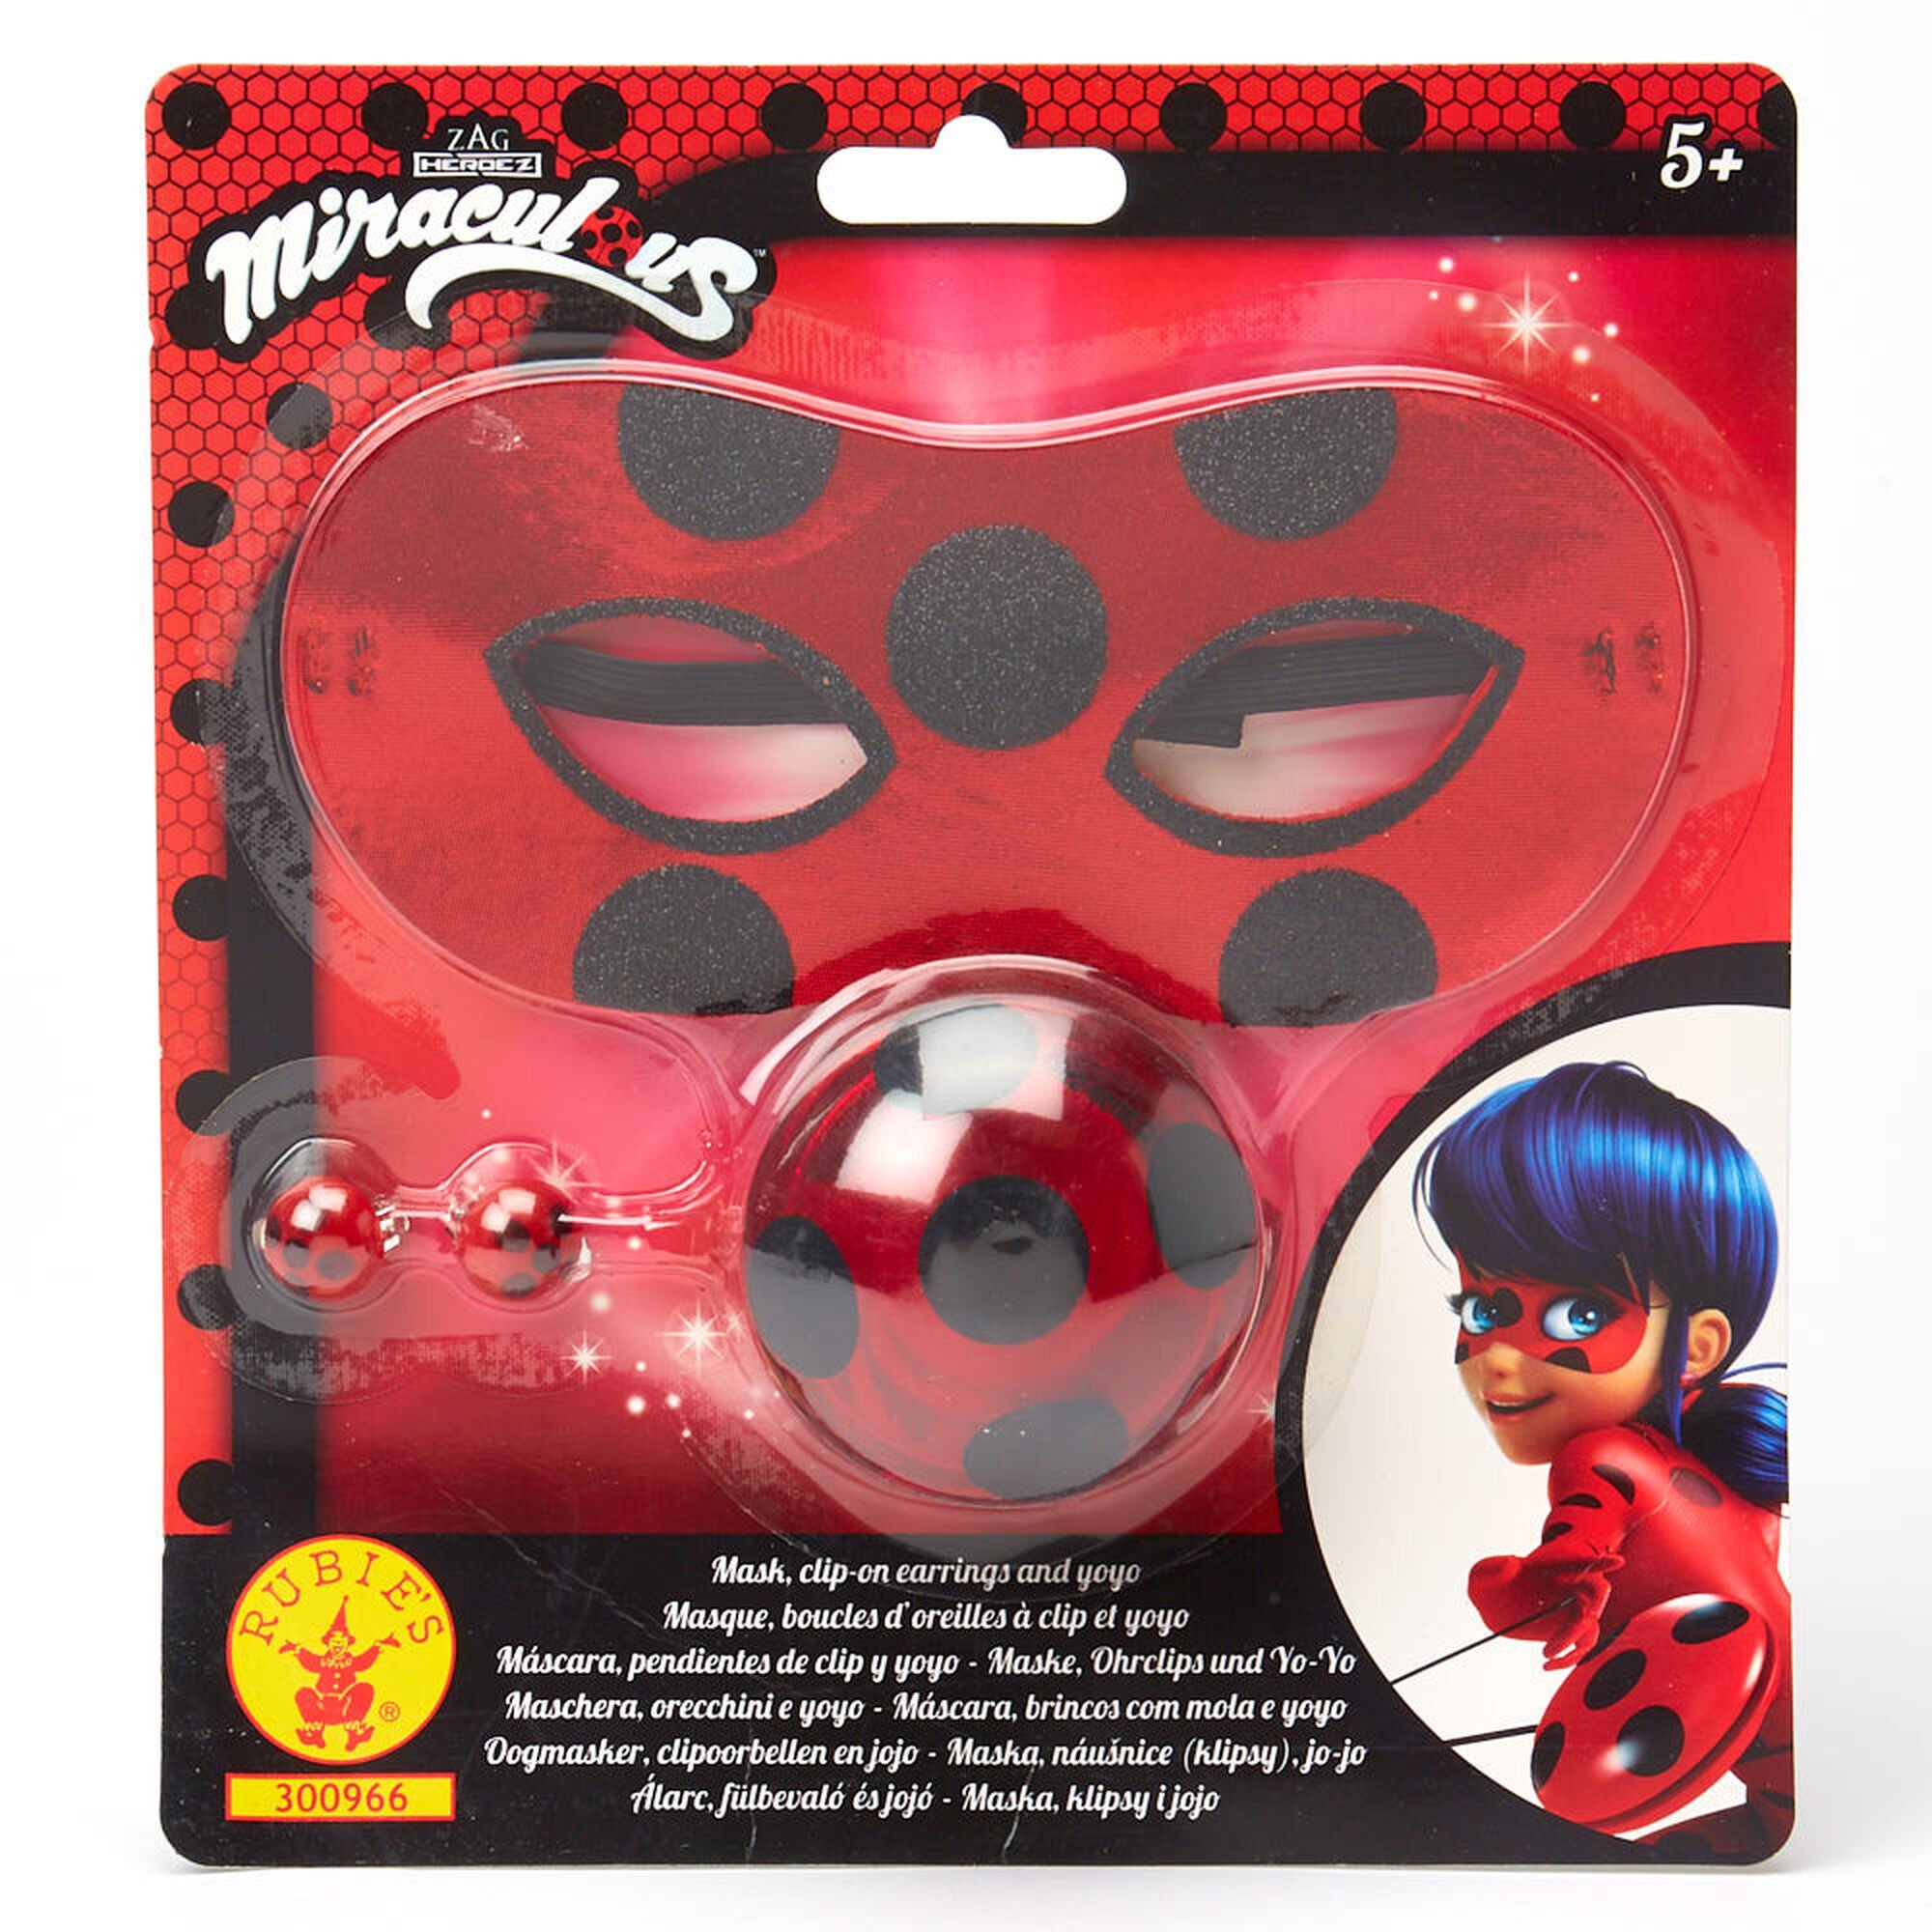 View Claires Miraculous Ladybug Yoyo Dress Up Set Red 3 Pack information